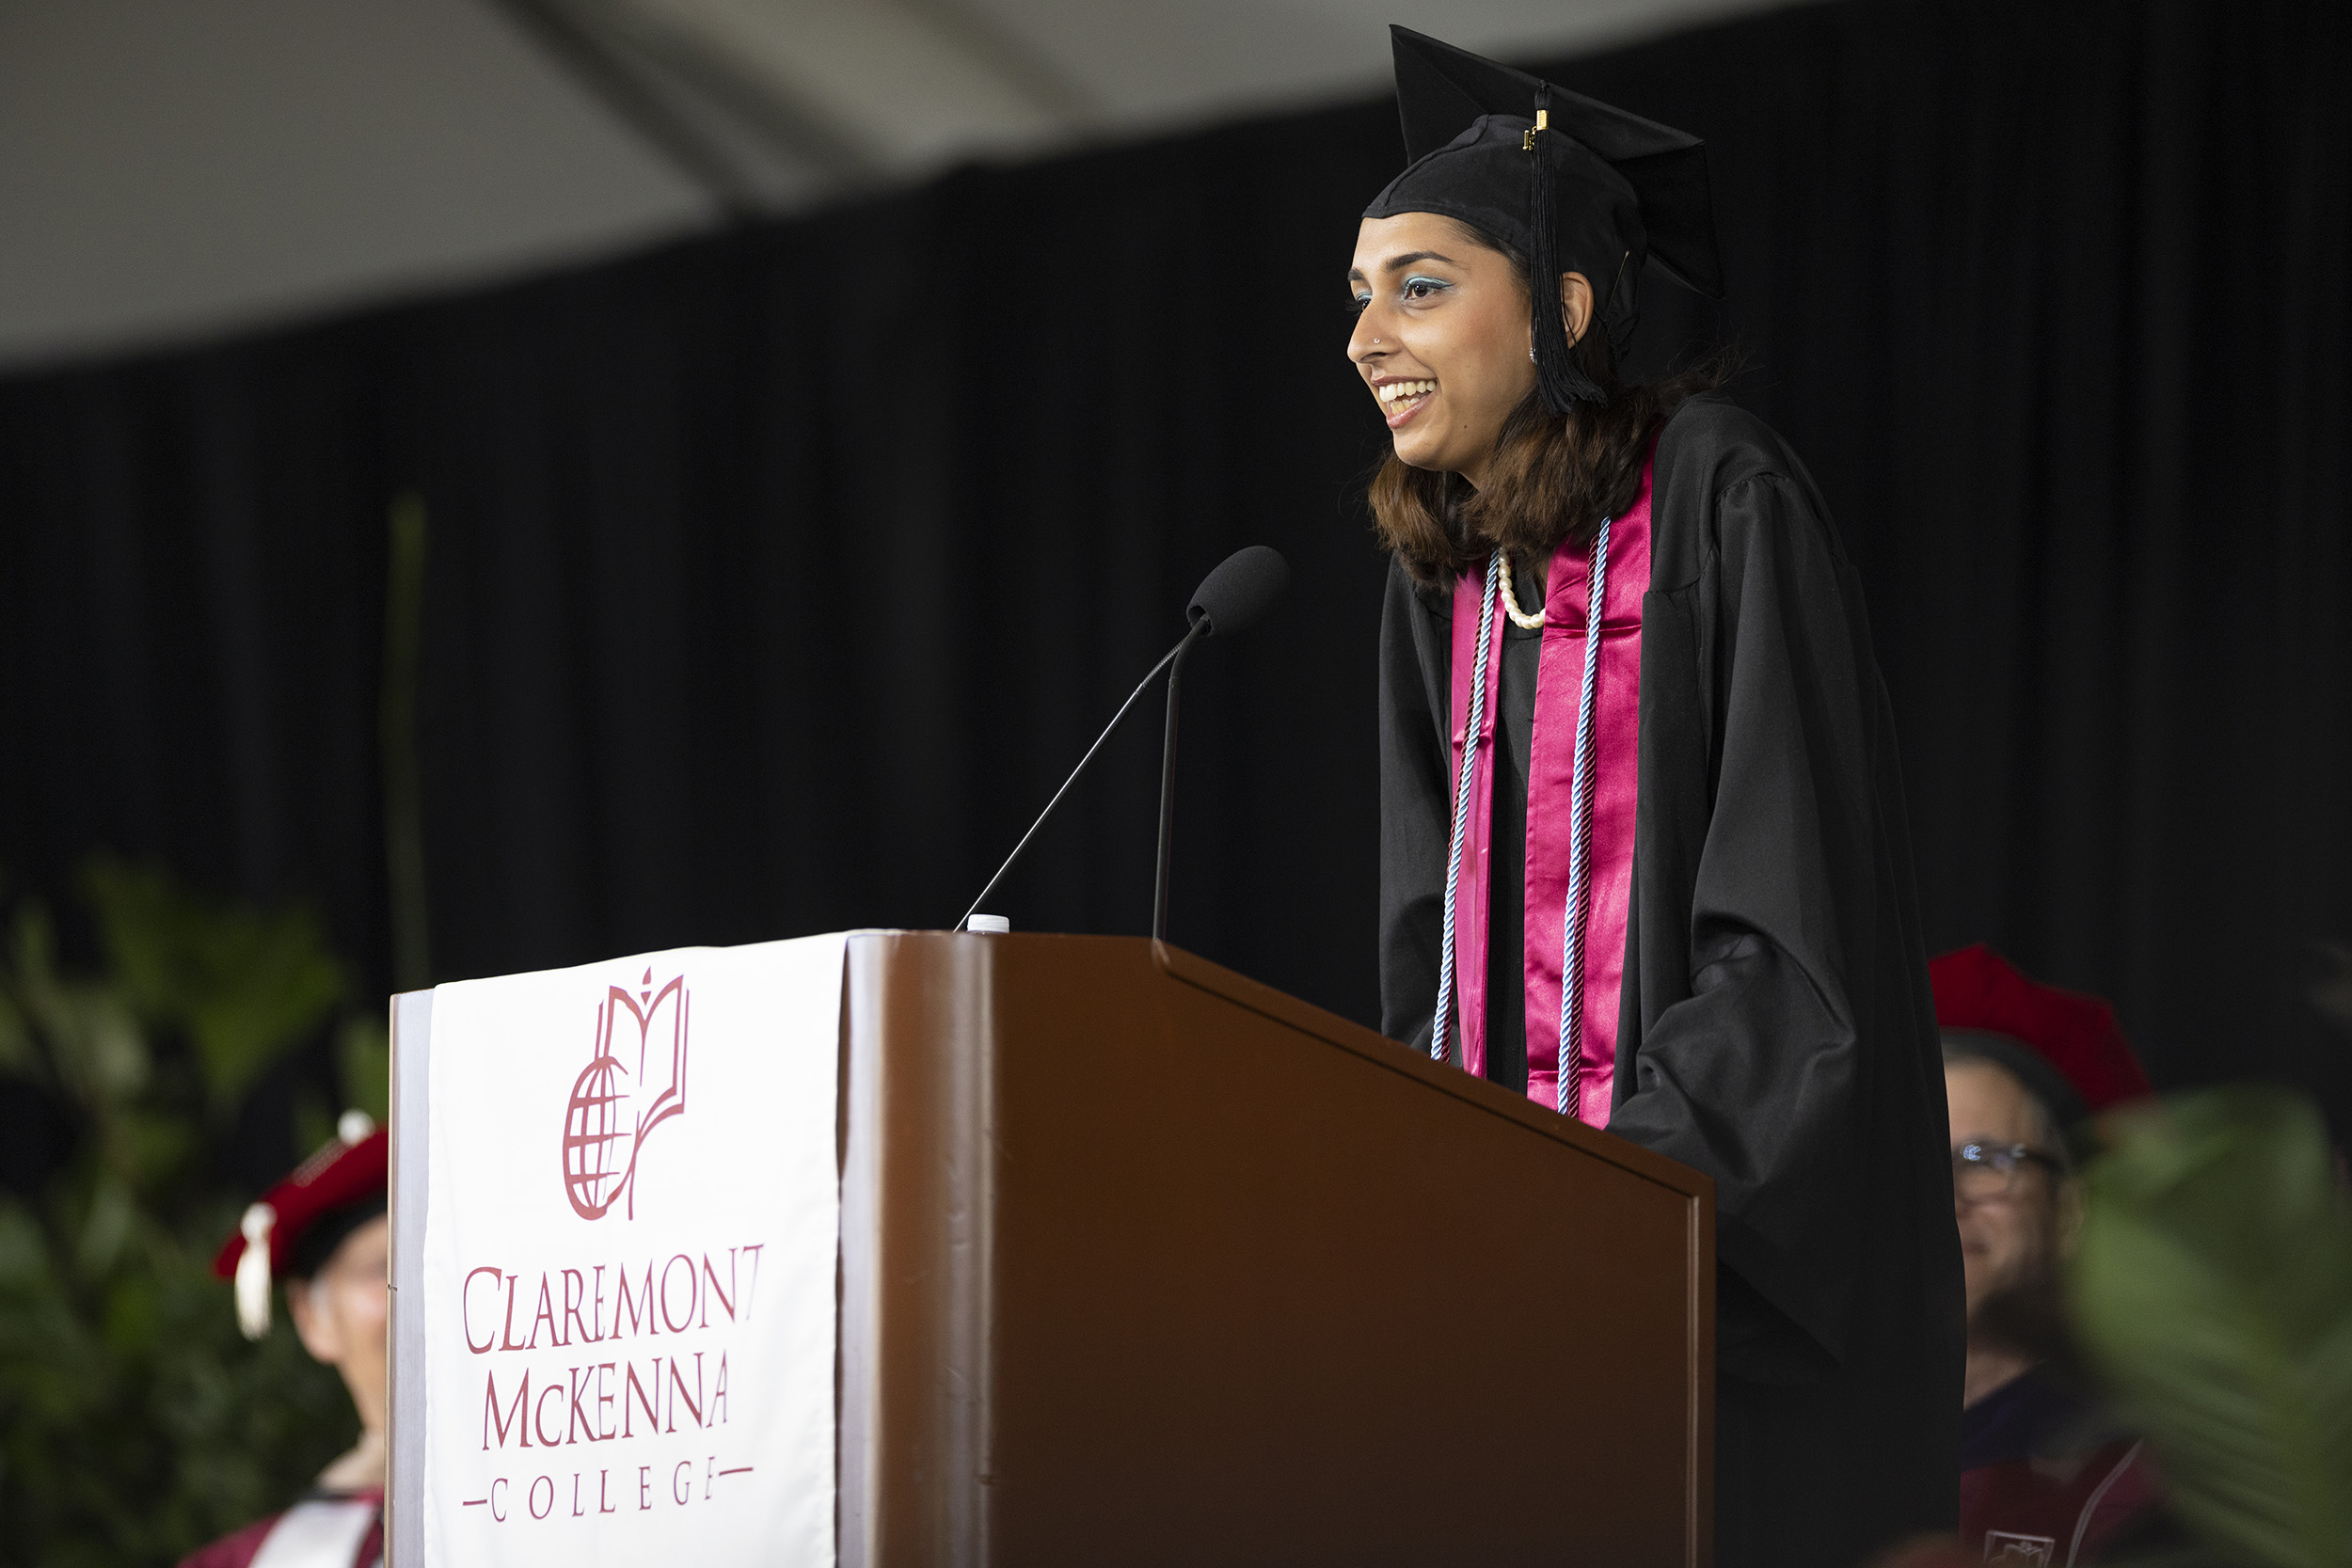 Class of 2020 Senior Class President Laleh Ahmad ’20 speaks at the podium during commencement for the classes of 2020 and 2021.